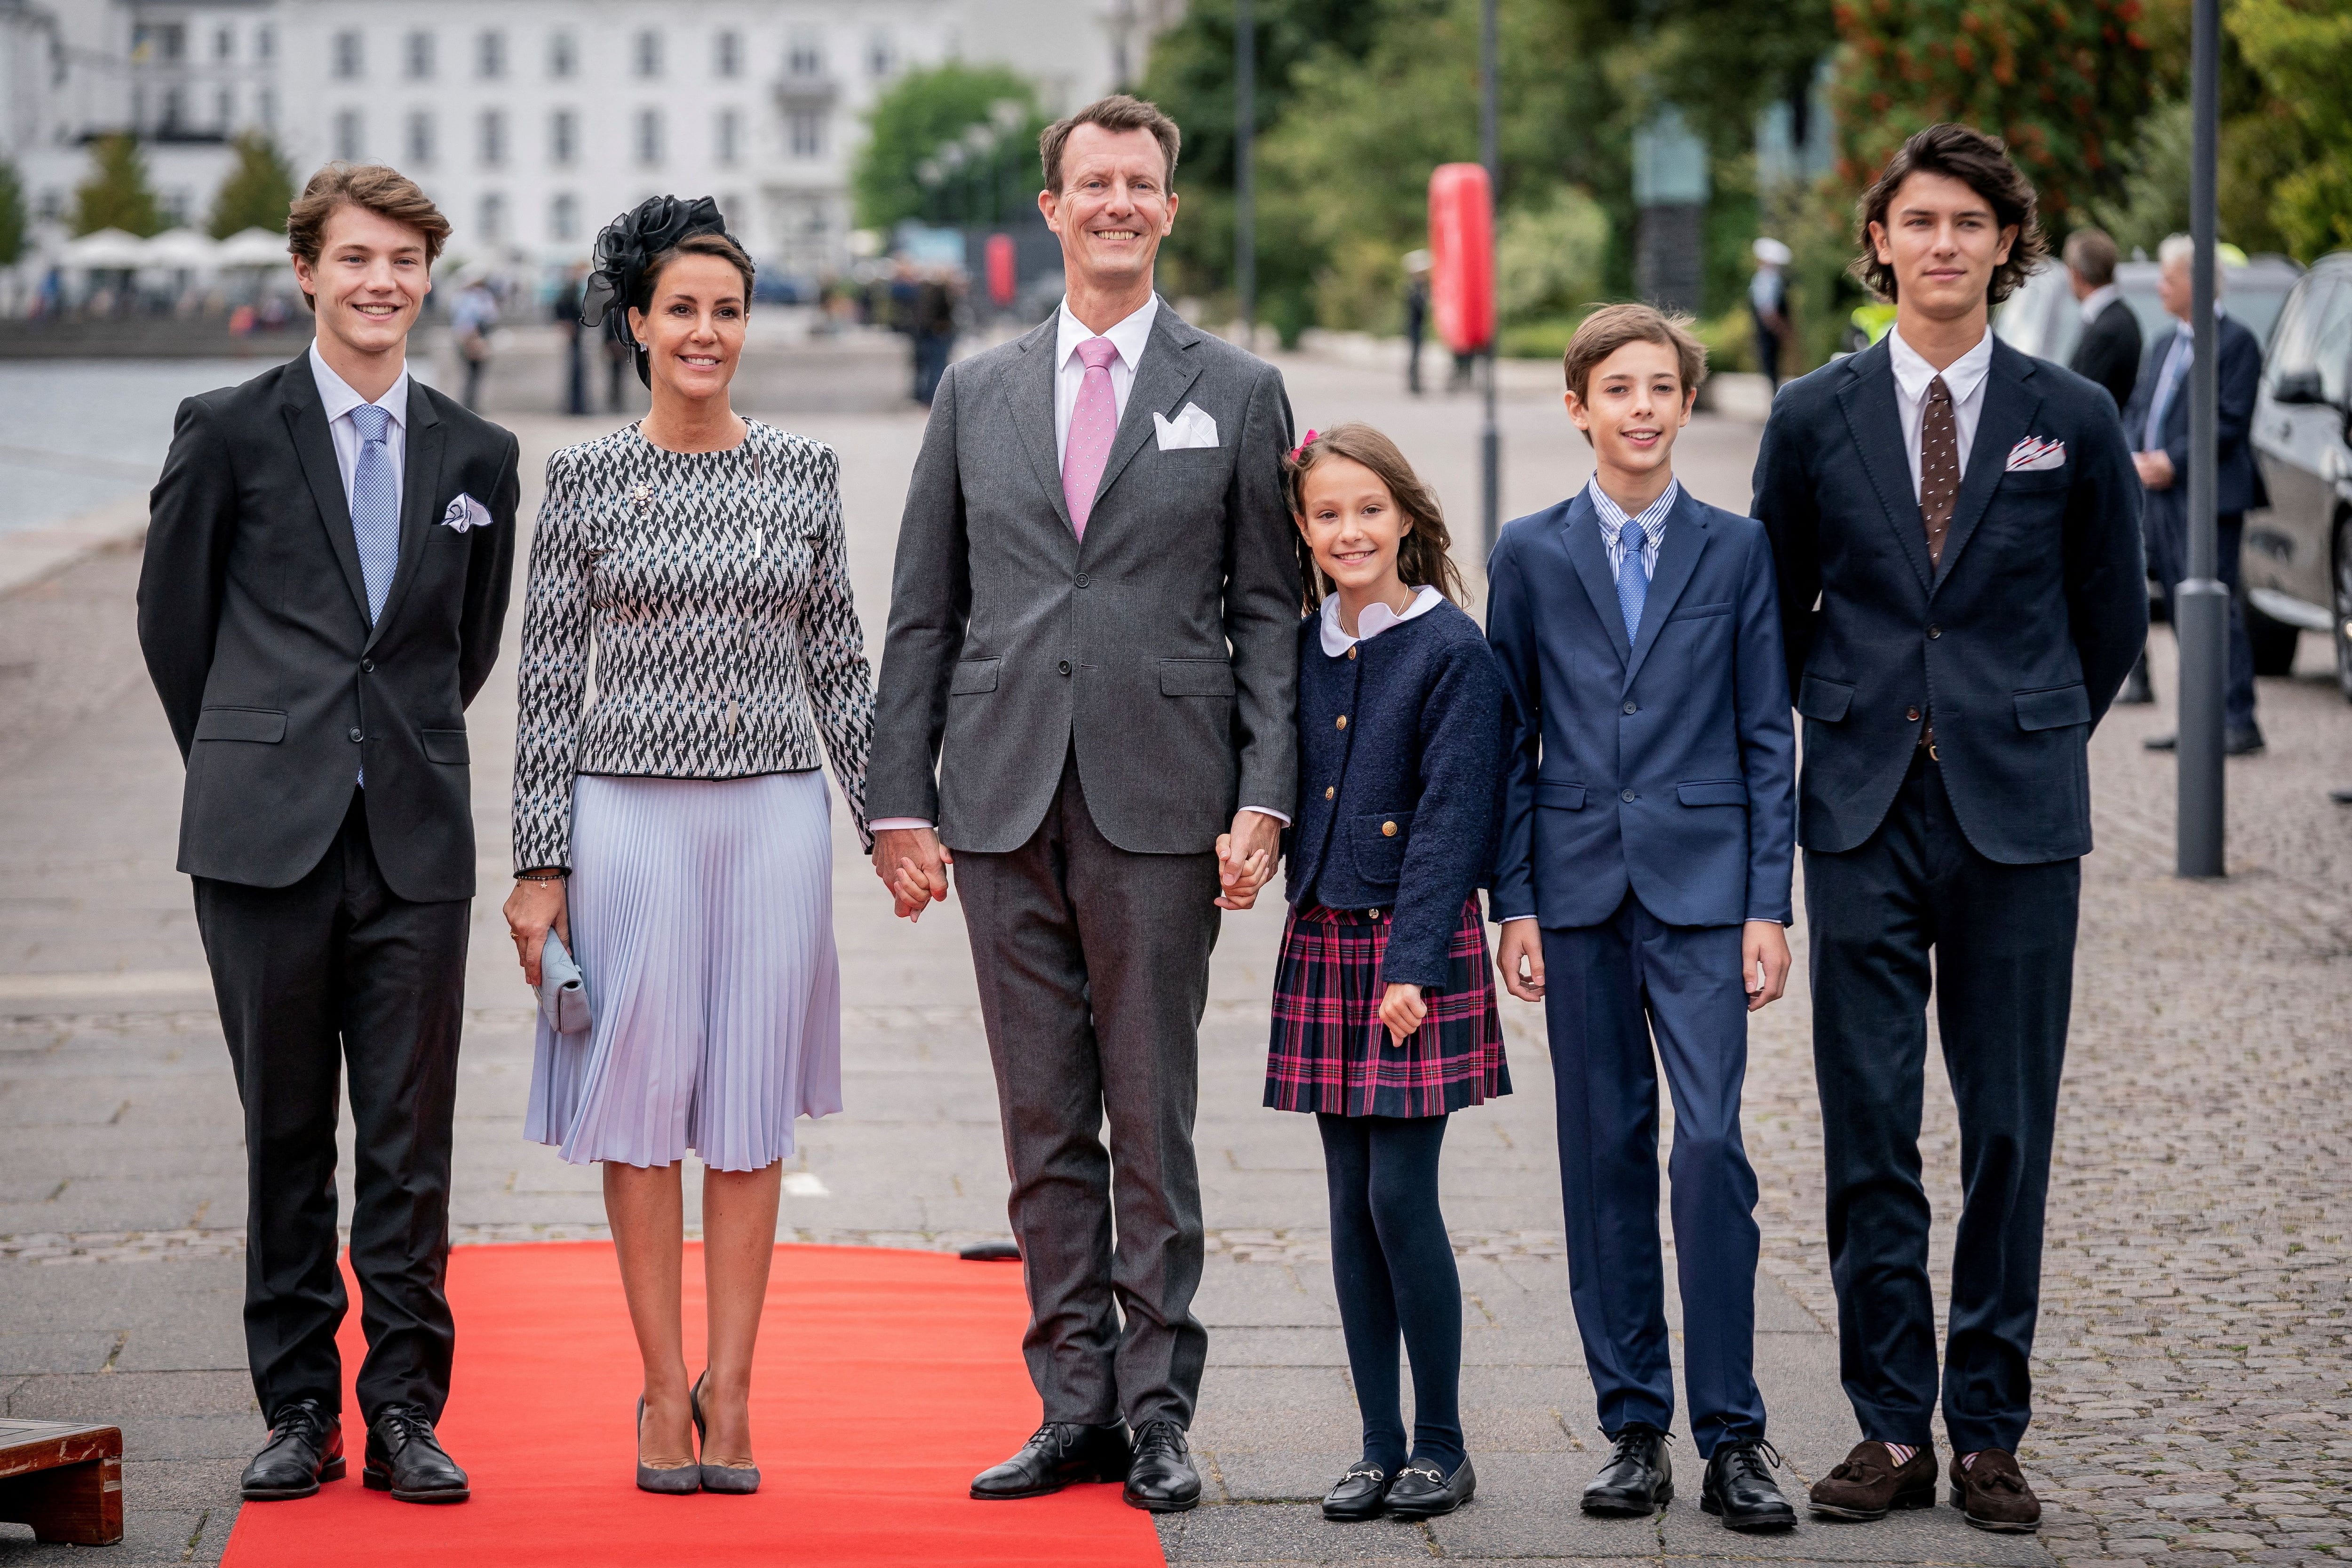 Denmark's Queen Margrethe 50th anniversary of her accession to the throne